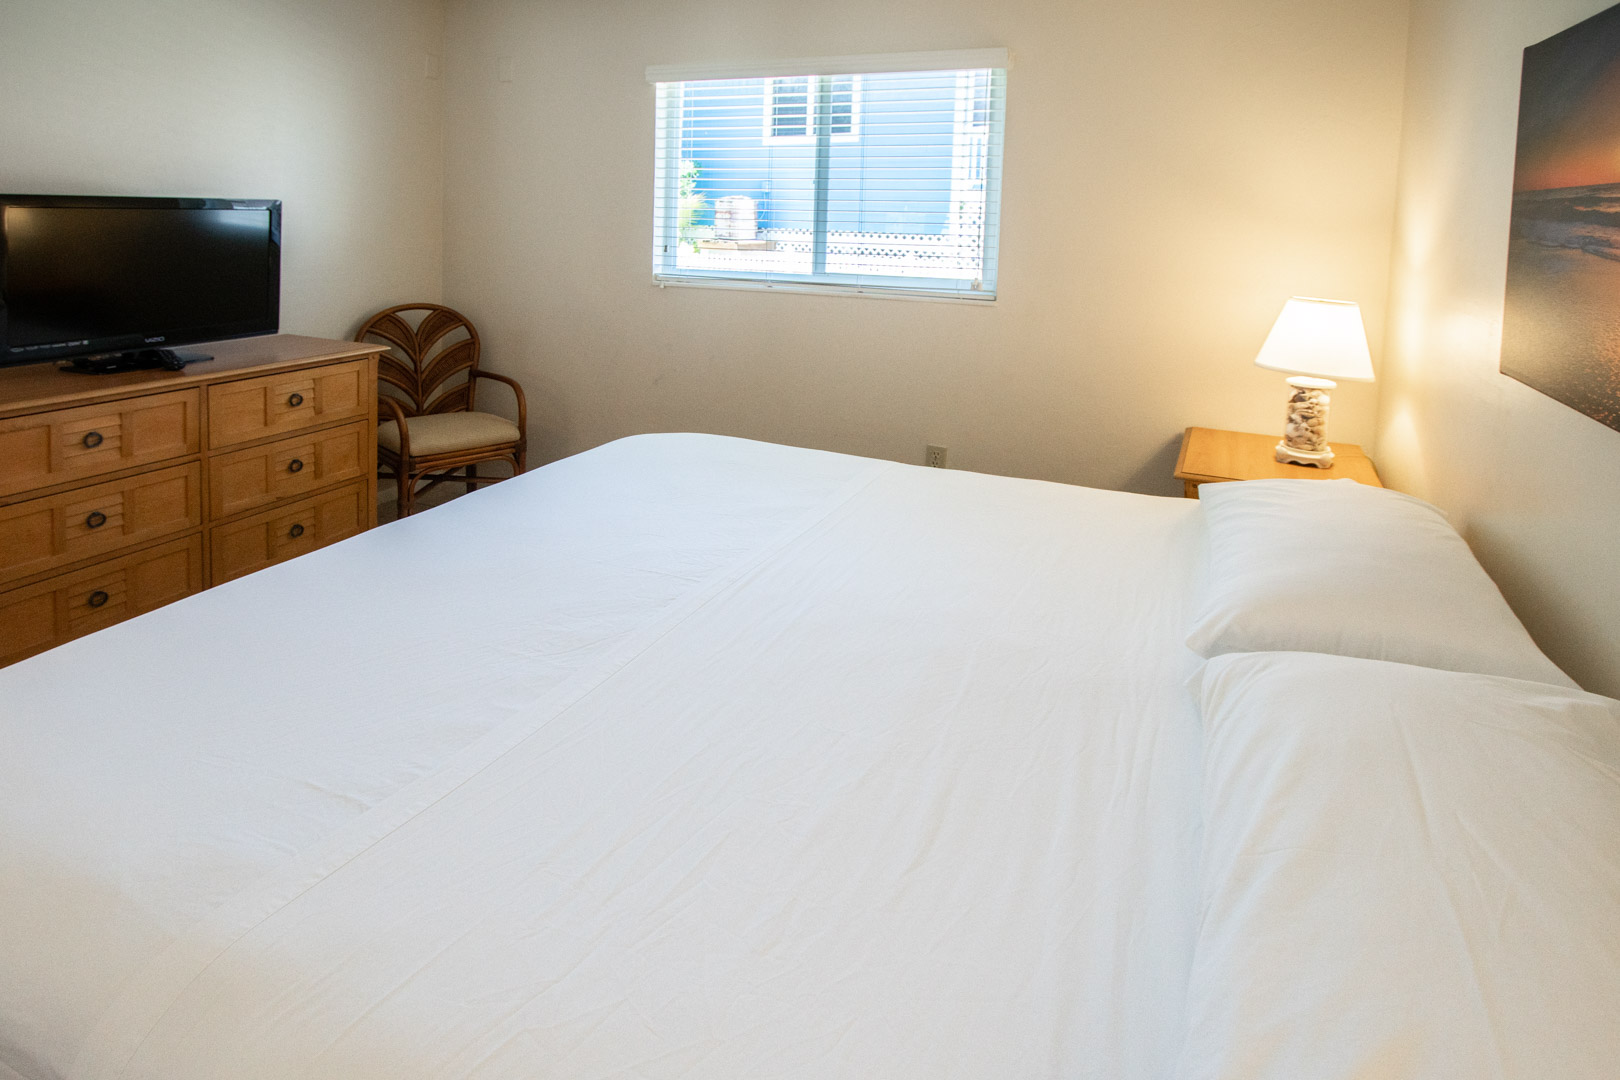 A spacious bedroom at VRI's Windward Passage Resort in Fort Myers Beach, Florida.